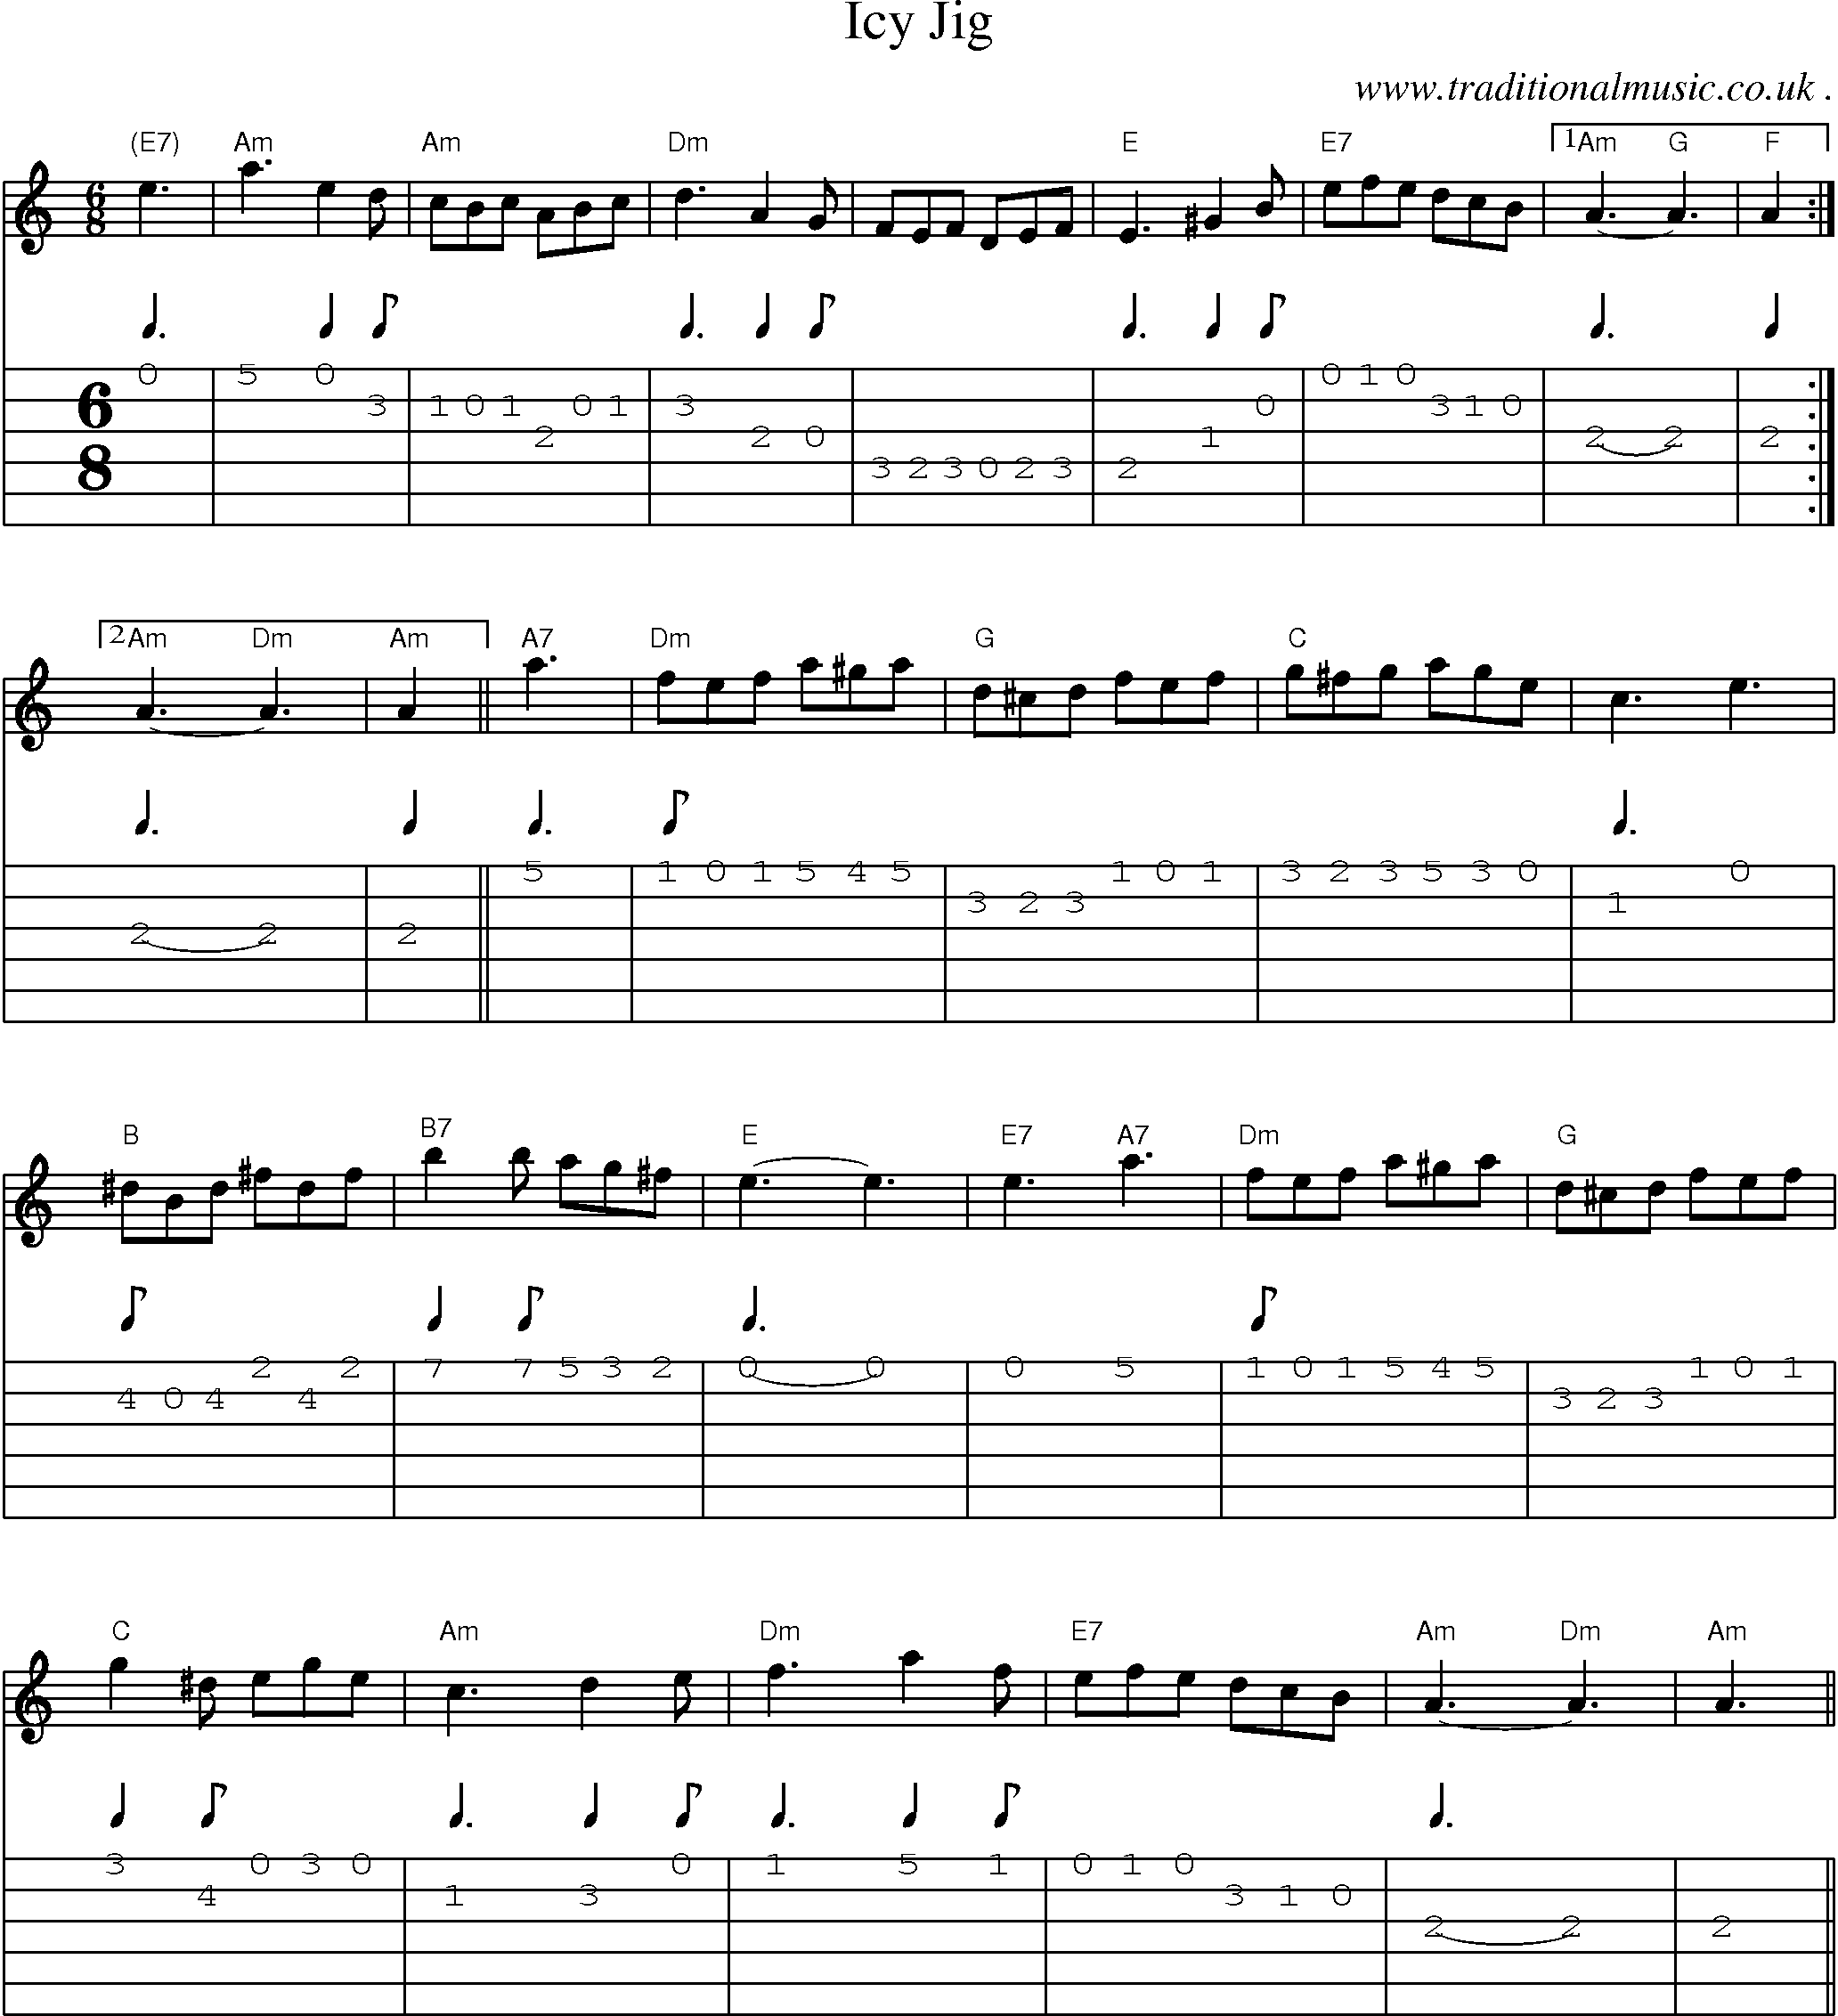 Sheet-Music and Guitar Tabs for Icy Jig